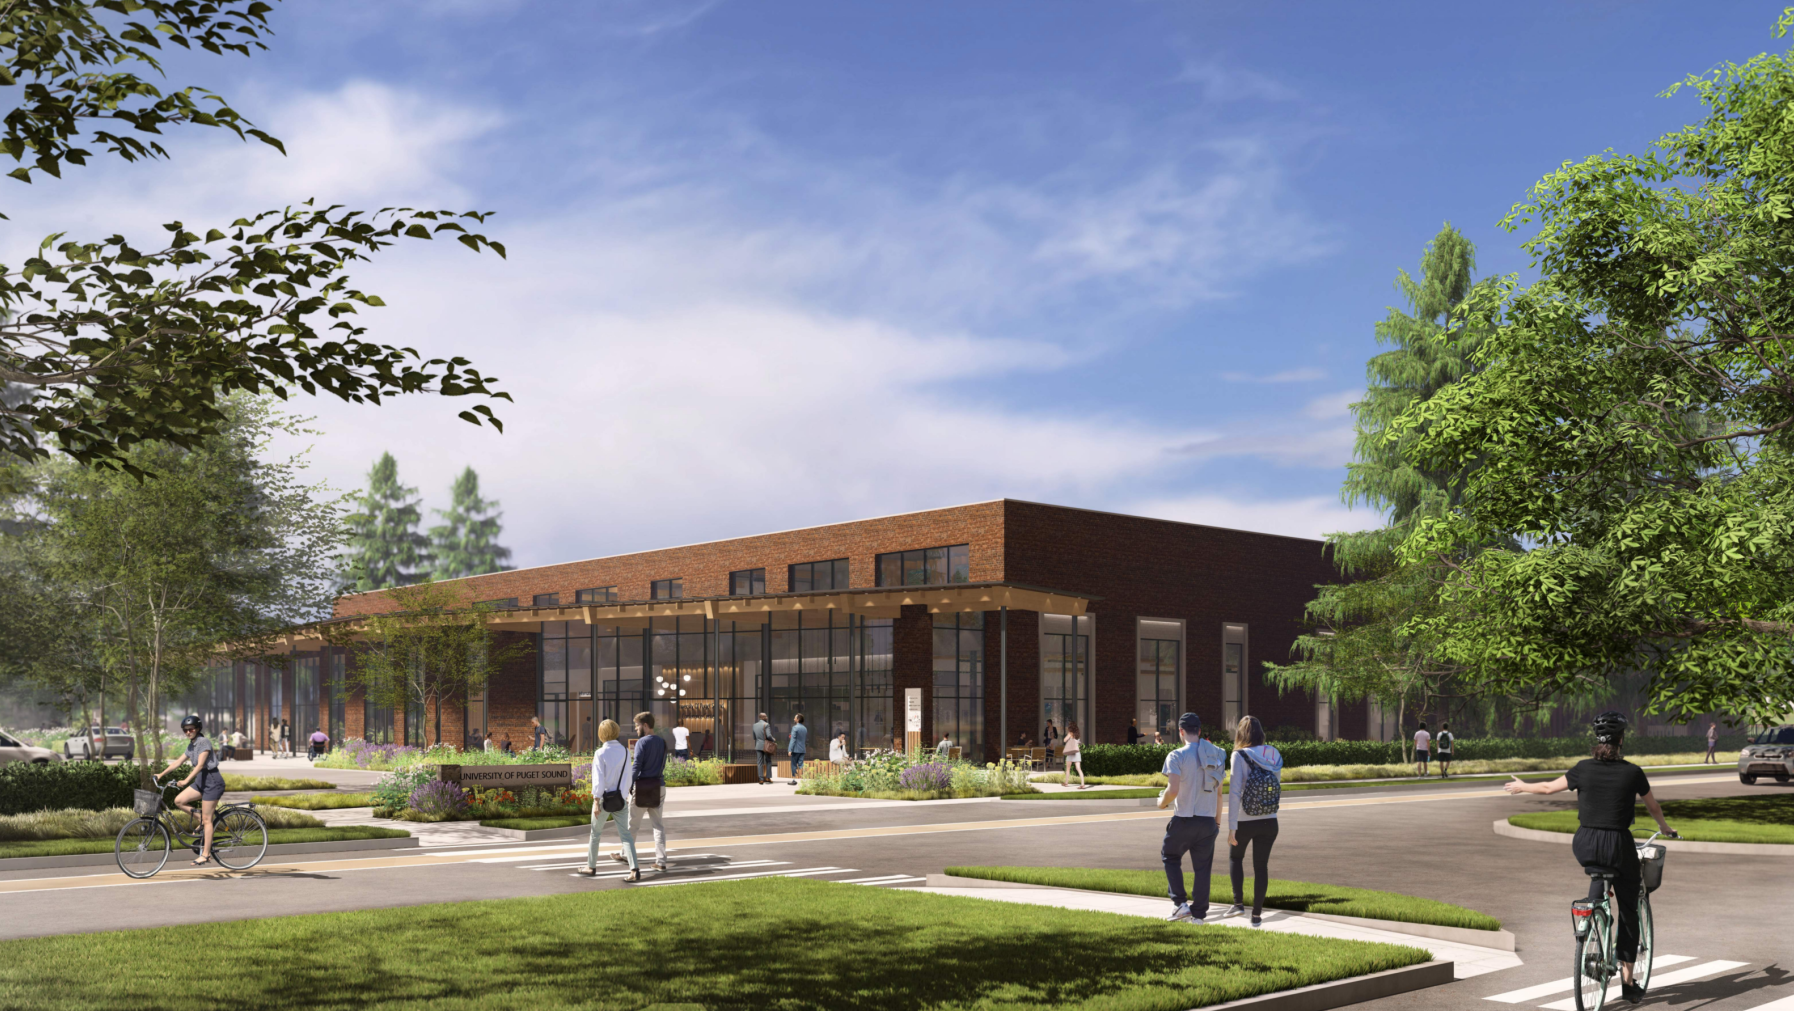 Rendering of the Conference Center from the 2023-43 Campus Development Plan